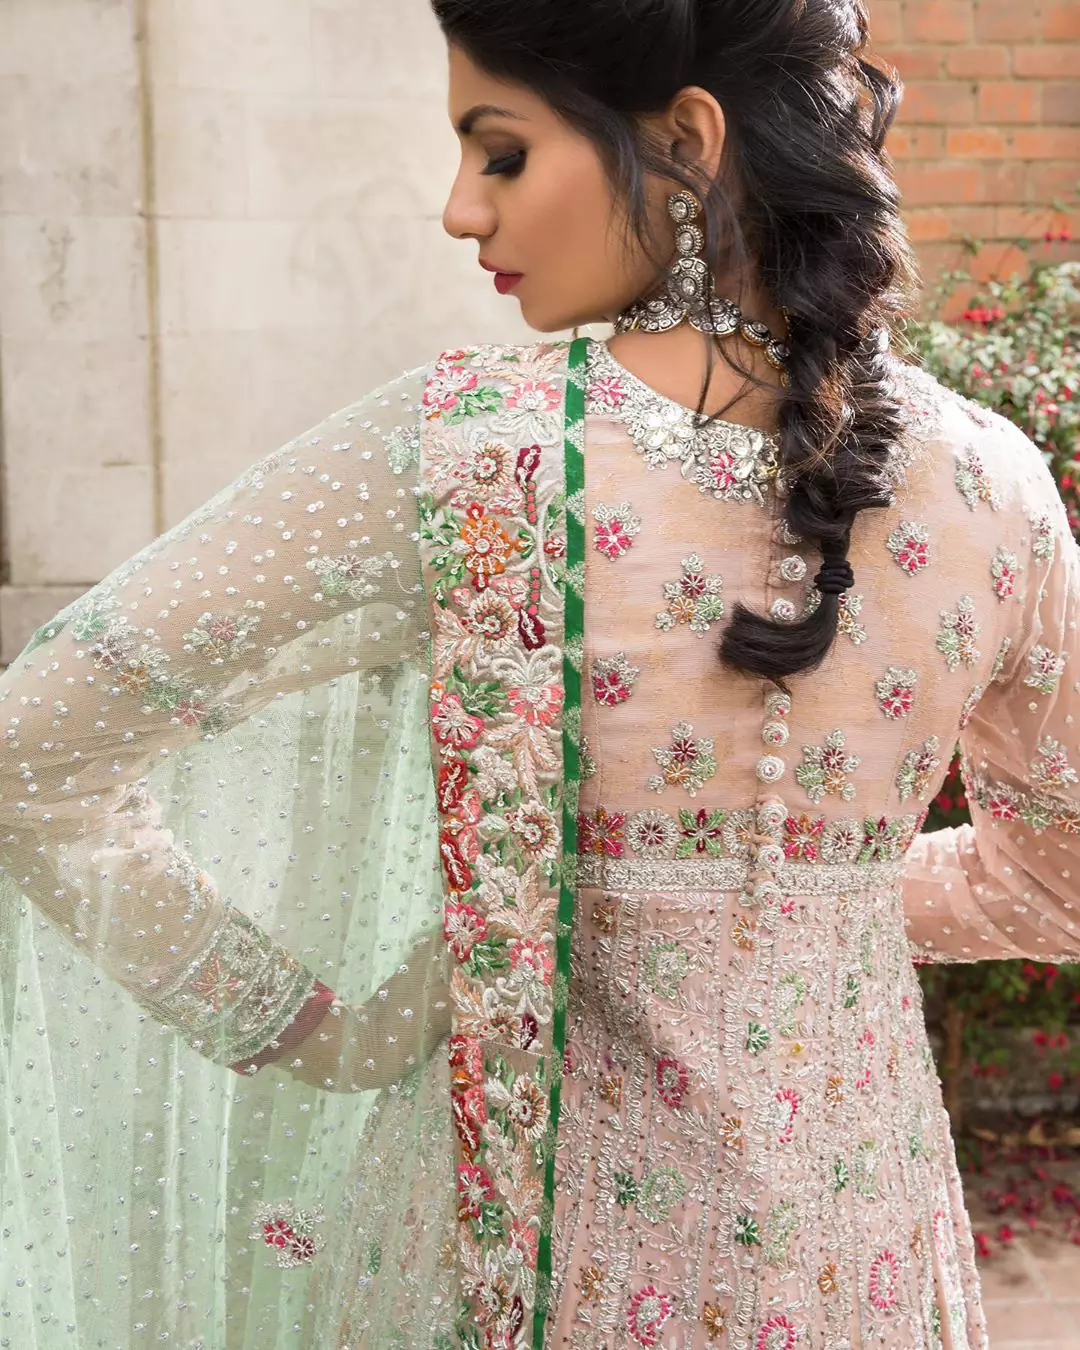 Opt for our ivory multiple-panel anarkali dress with exquisite embellishment on the bodice with pearls, sequins and silver kora, dabka. The daaman comprises of borders highlighted with floral embellished pattern. It is finished with deep blush frilled lehengha which adds to the bling. Dupatta is allured with four sided embellished border and sprinkled with stones all over it.